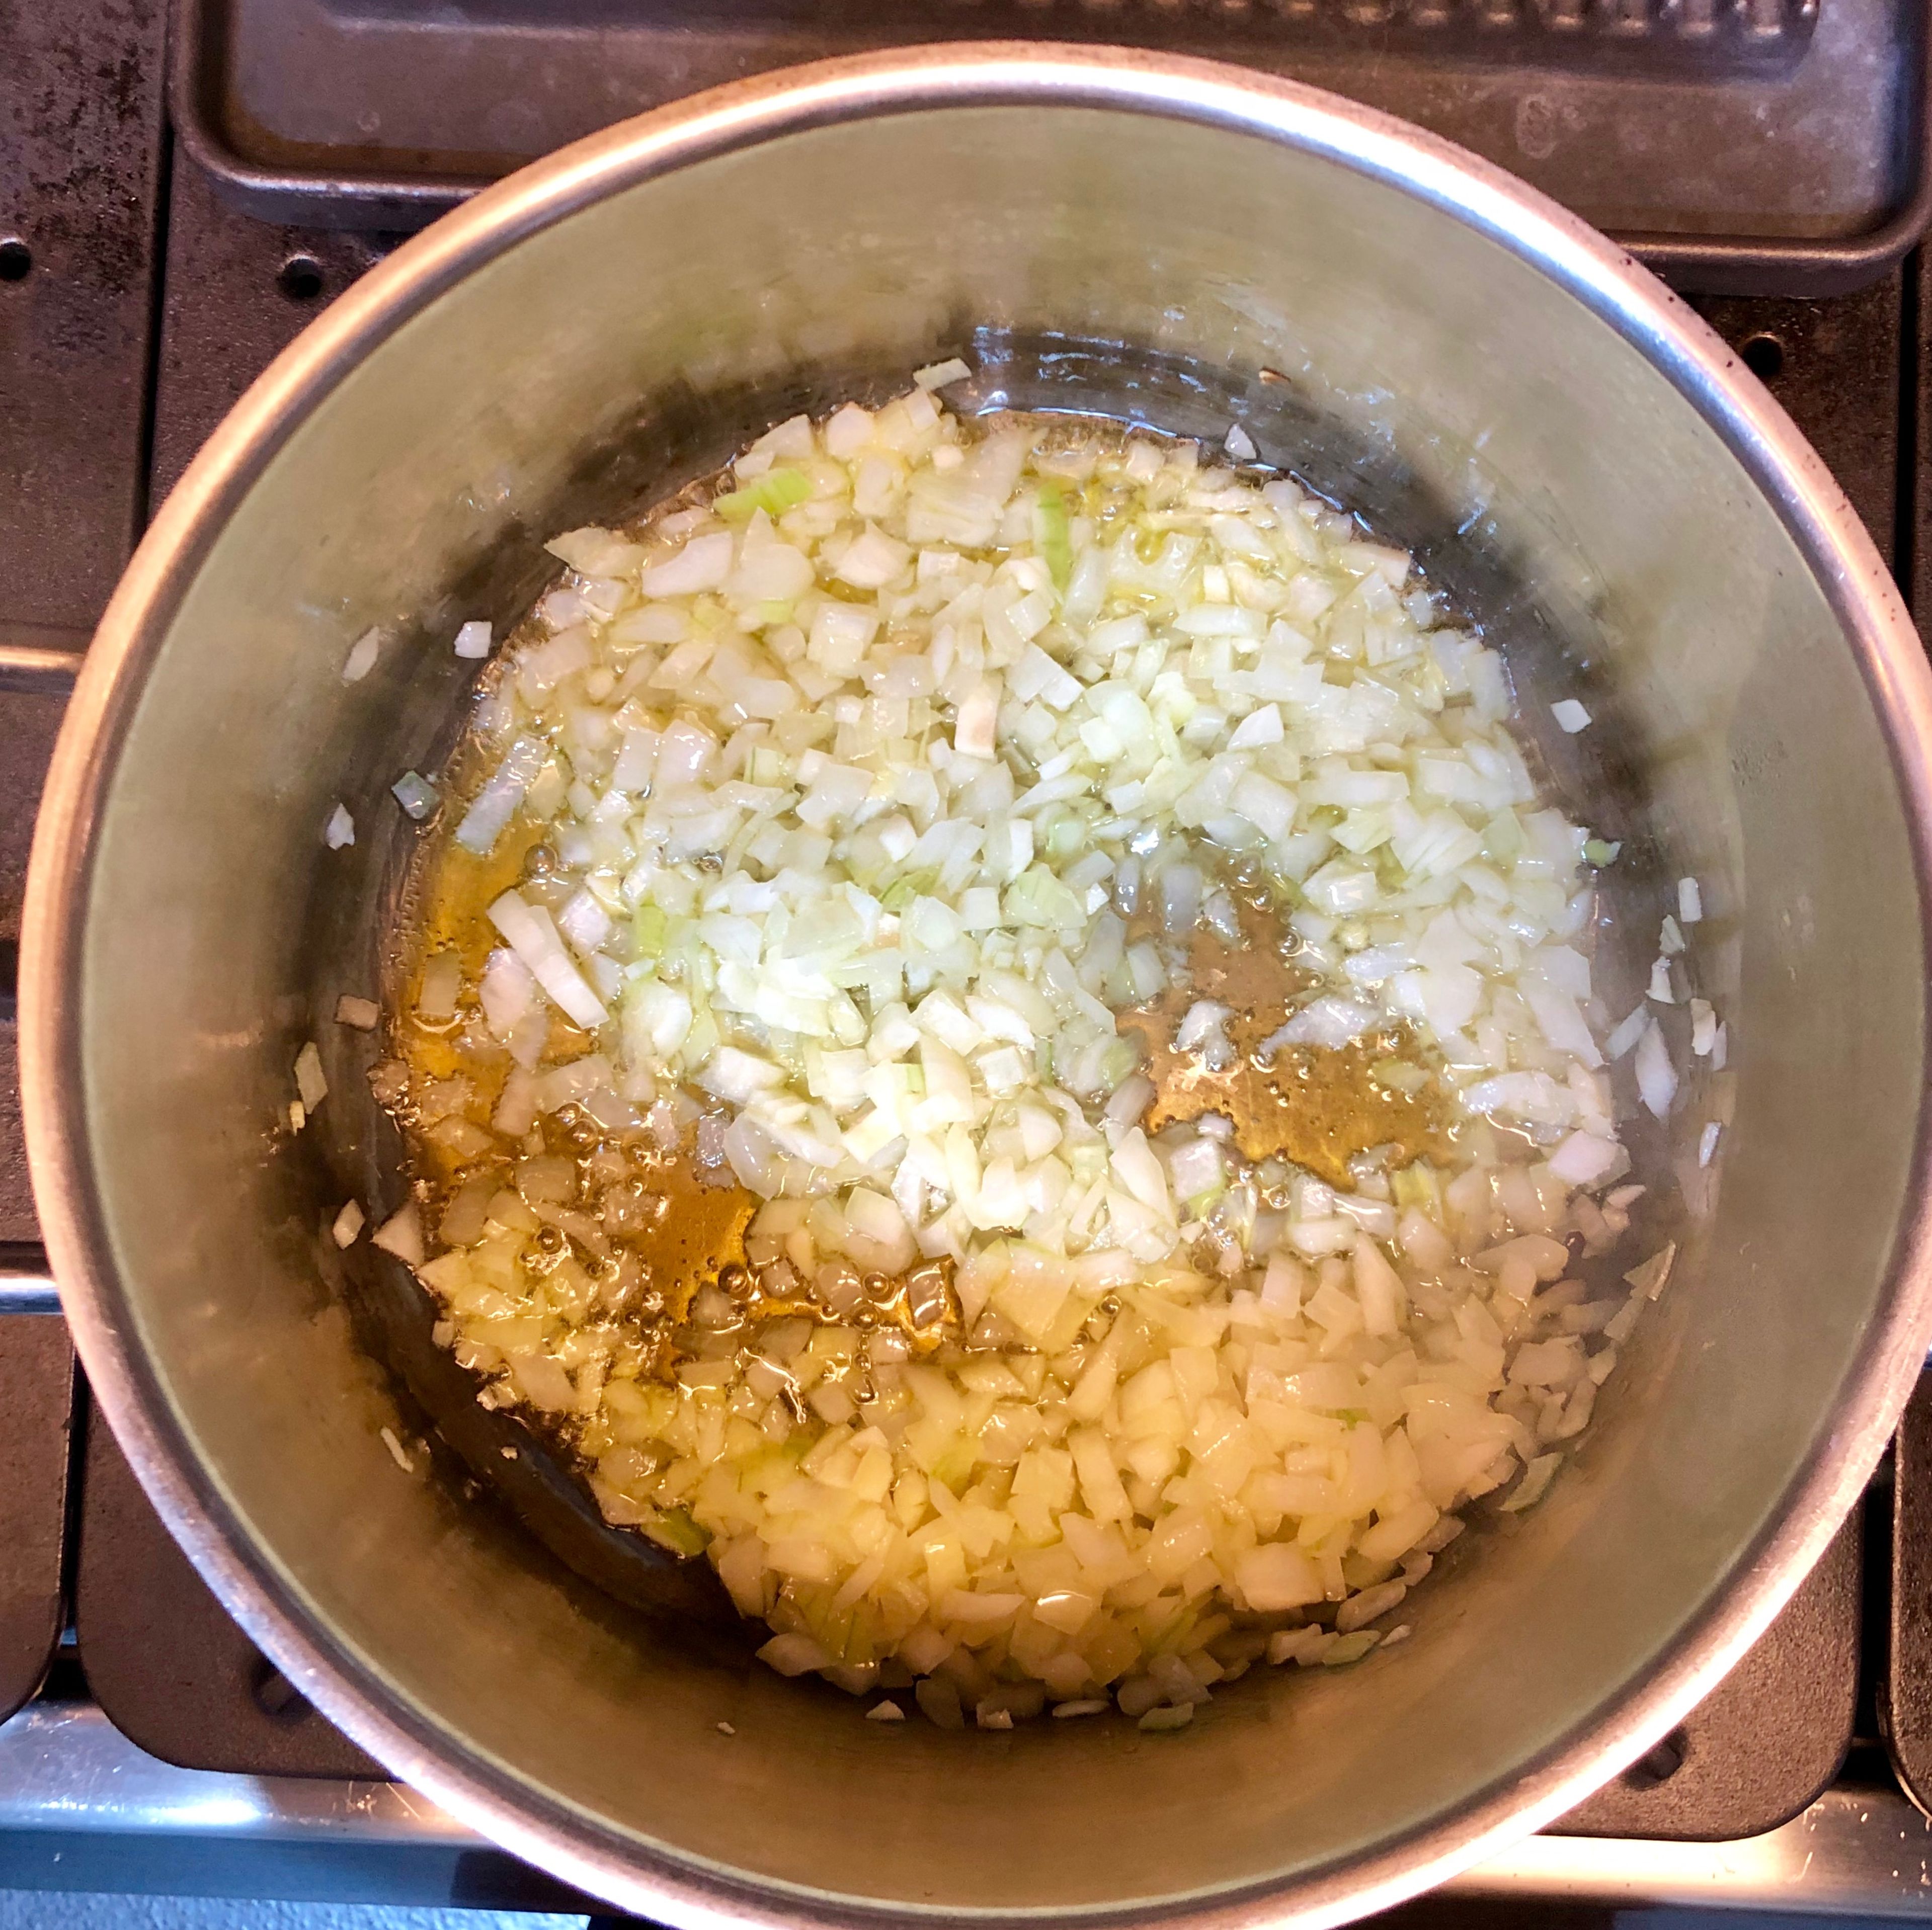 Heat olive oil in a stockpot. Add onion and garlic and cook until soft but not brown, about 5 minutes.